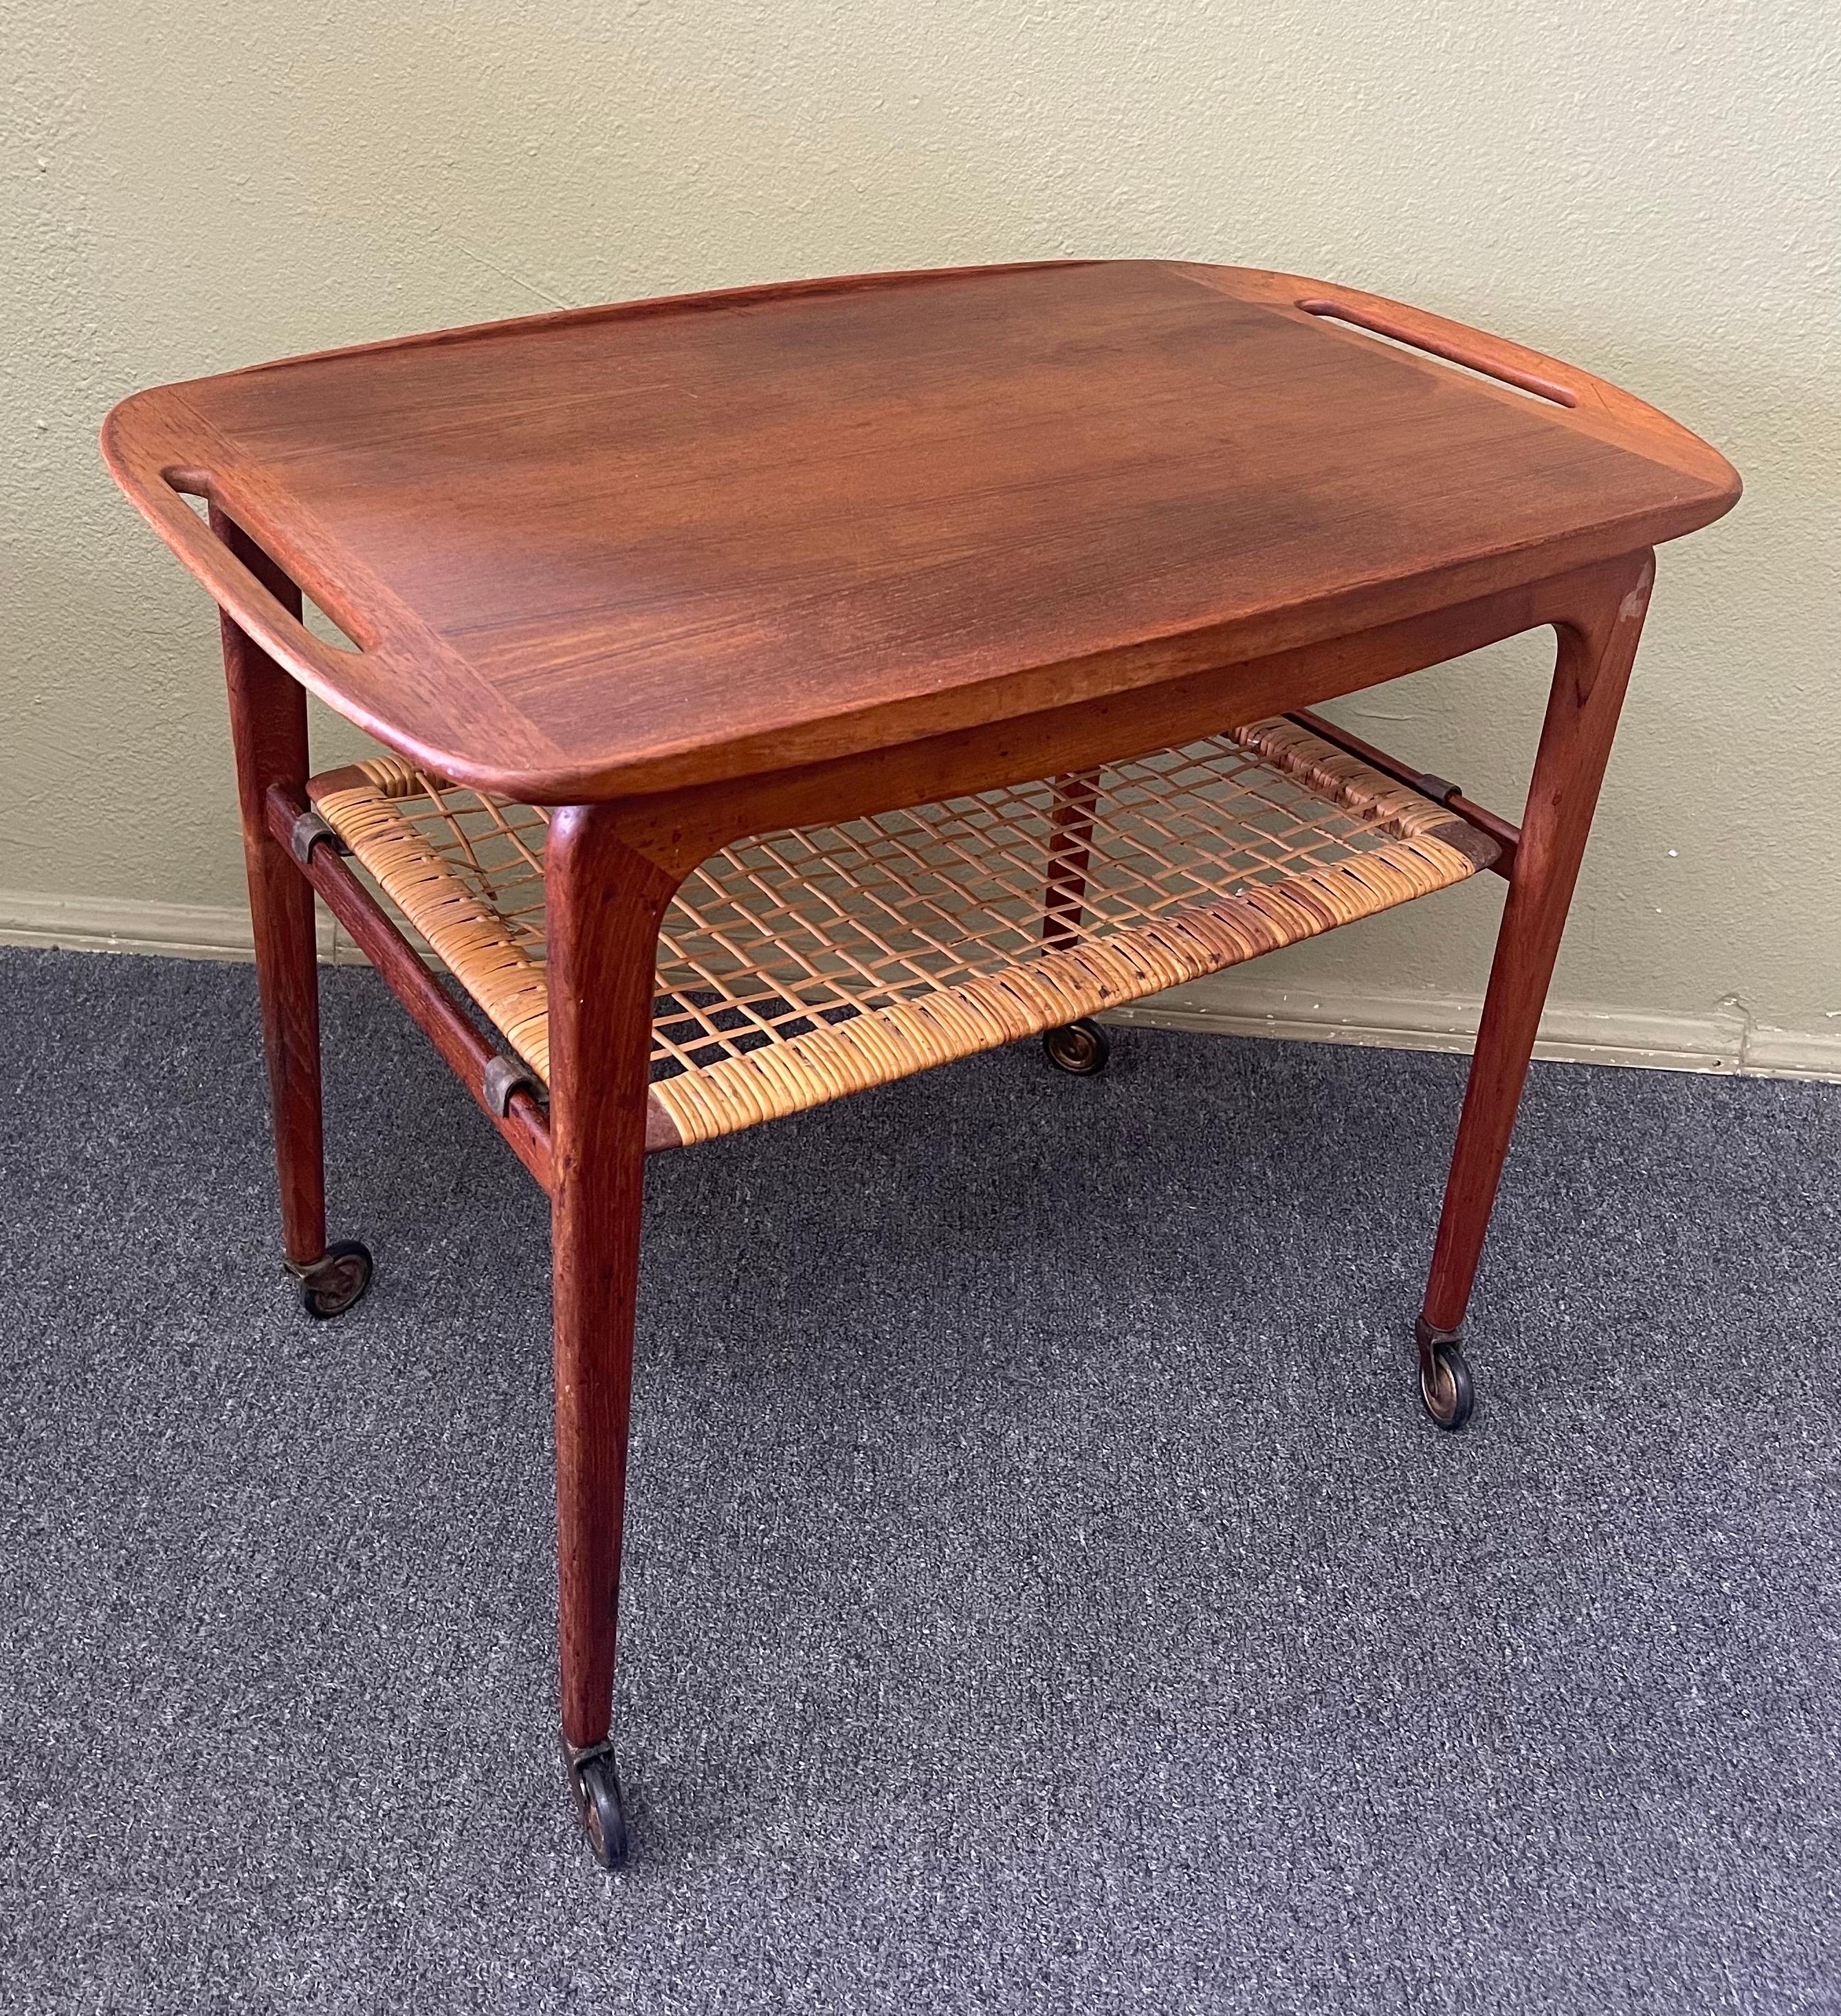 Danish Modern Teak Bar Cart with Removable Tray by Johannes Andersen / Silkeborg For Sale 11